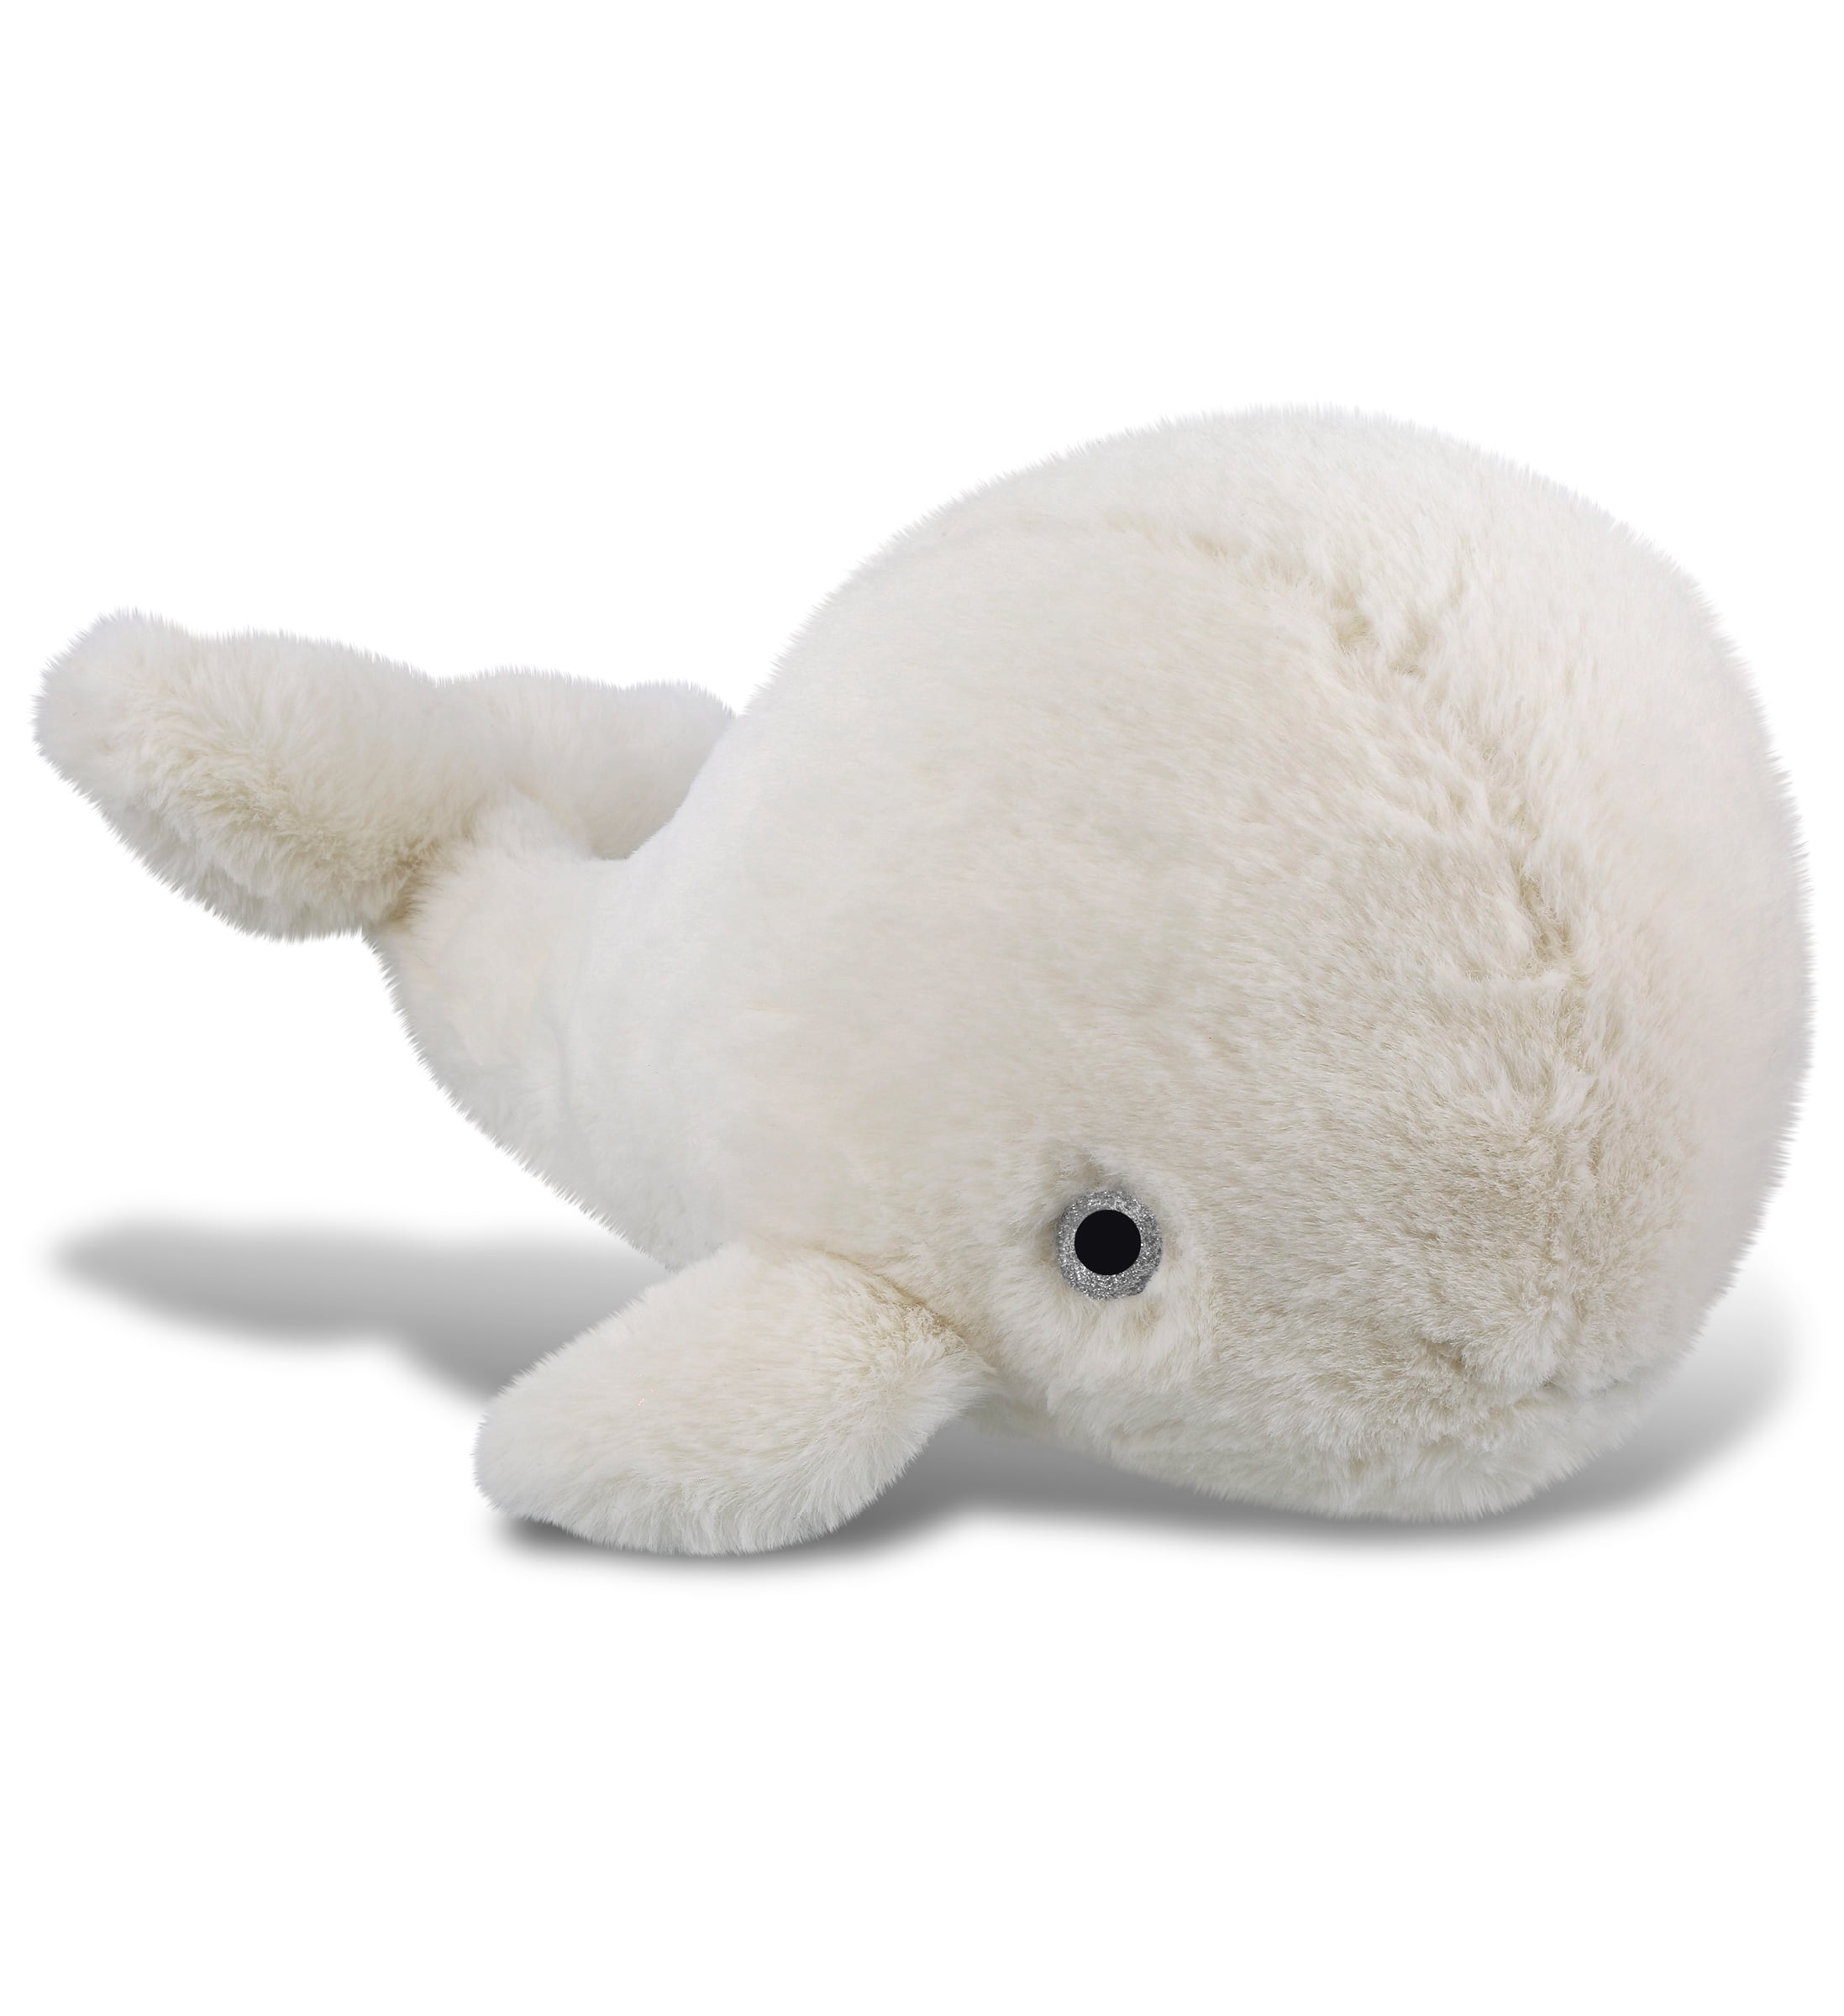 DolliBu Plush Whale Stuffed Animal - Soft Huggable White Whale, Adorable  Playtime Whale Plush Toy, Cute Ocean Life Cuddle Gifts, Super Soft Plush  Doll Animal Toy for Kids and Adults - 7